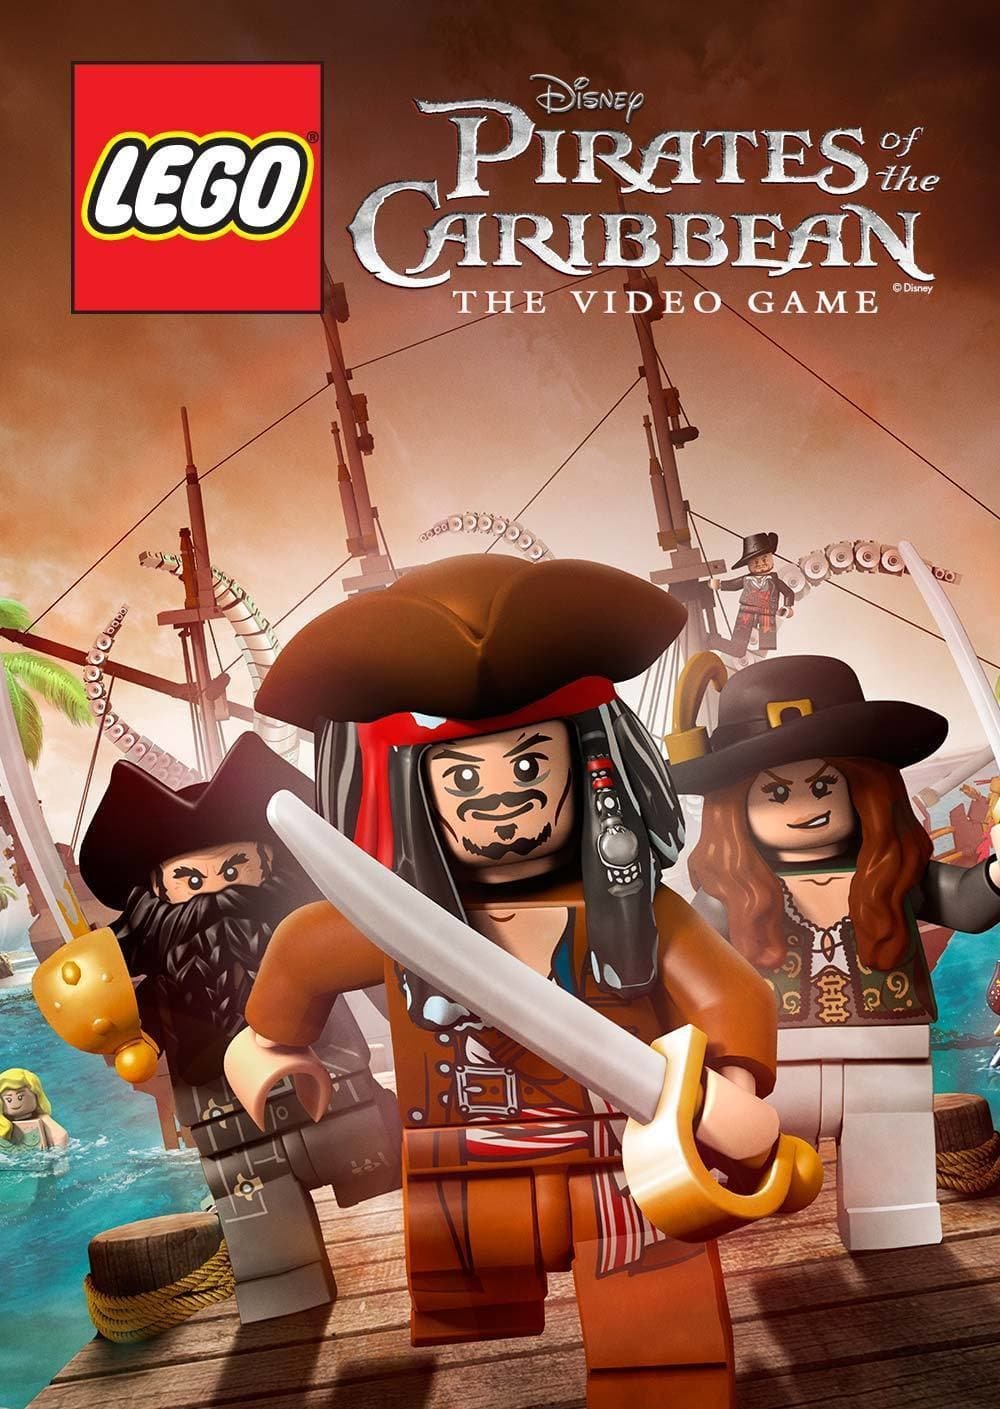 Image of Lego Pirates of the Caribbean